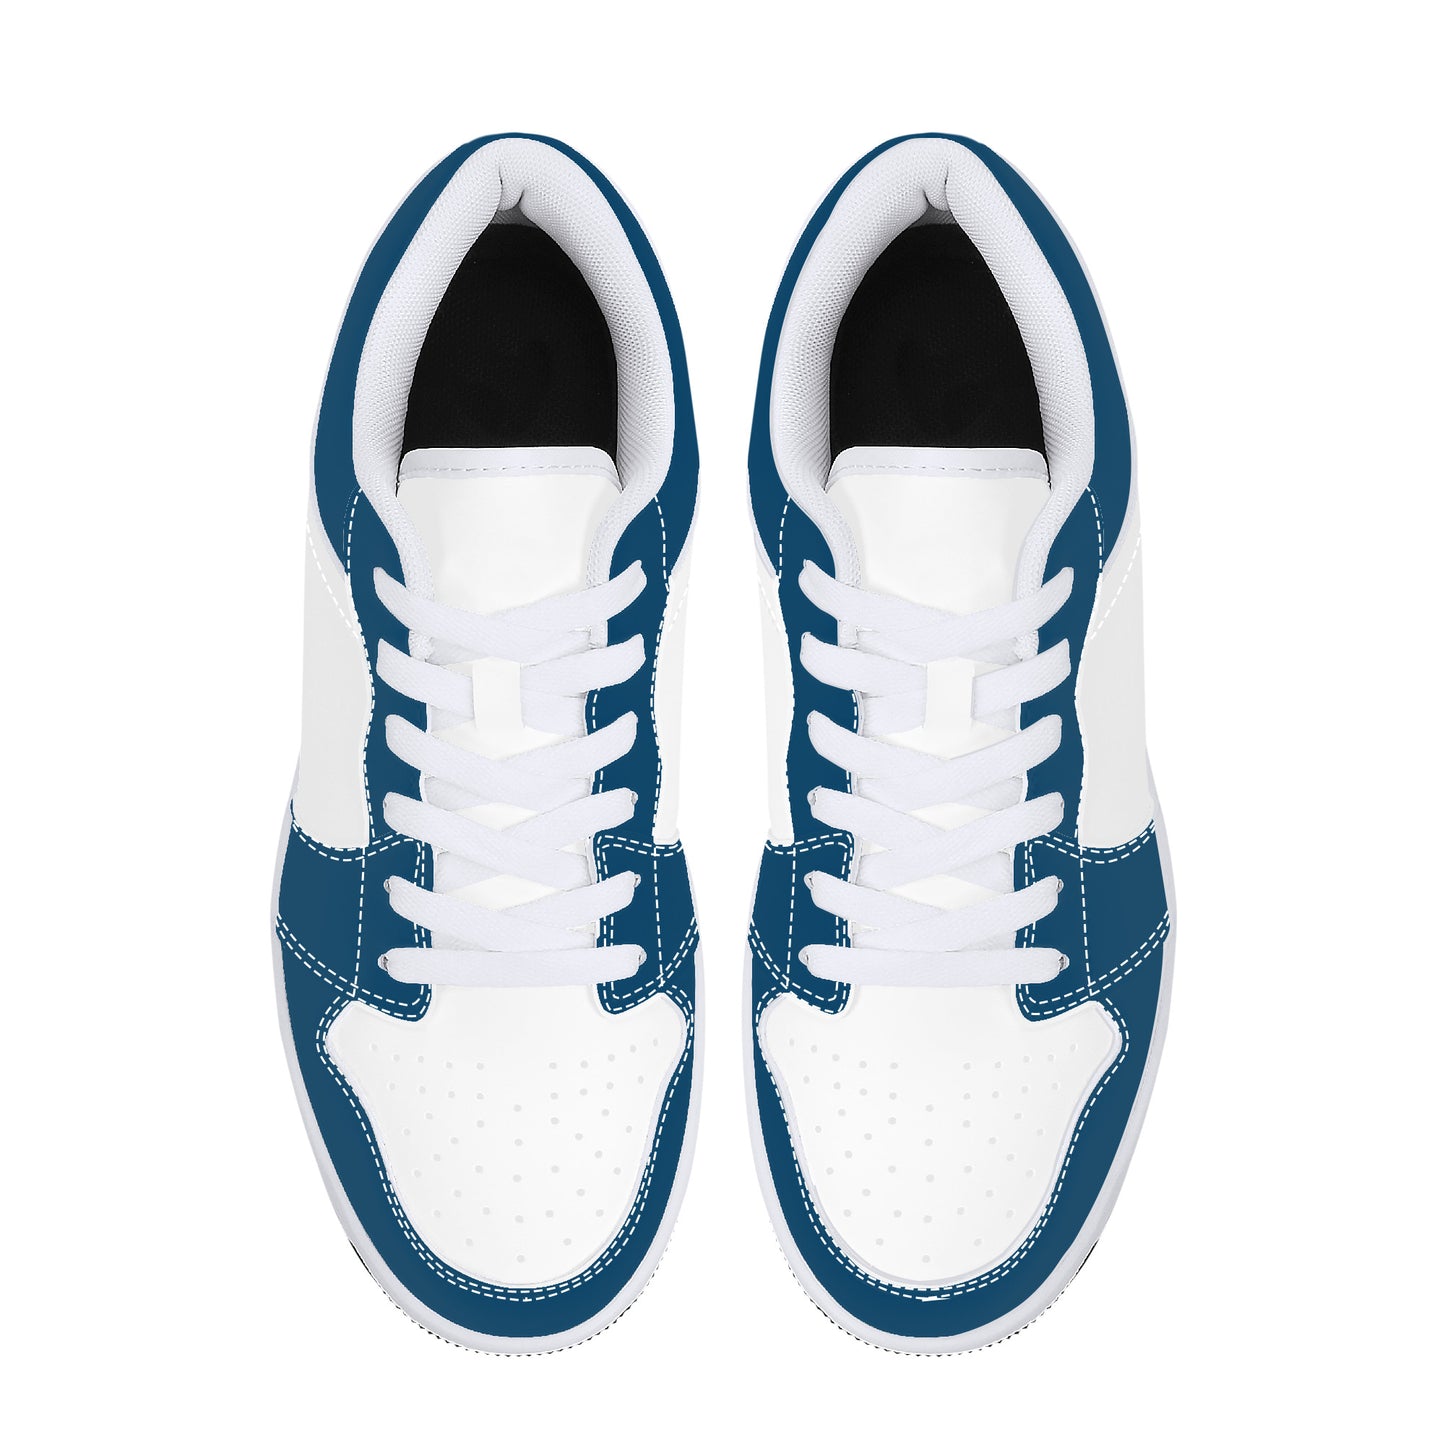 Leather Sneakers - Royal Blue